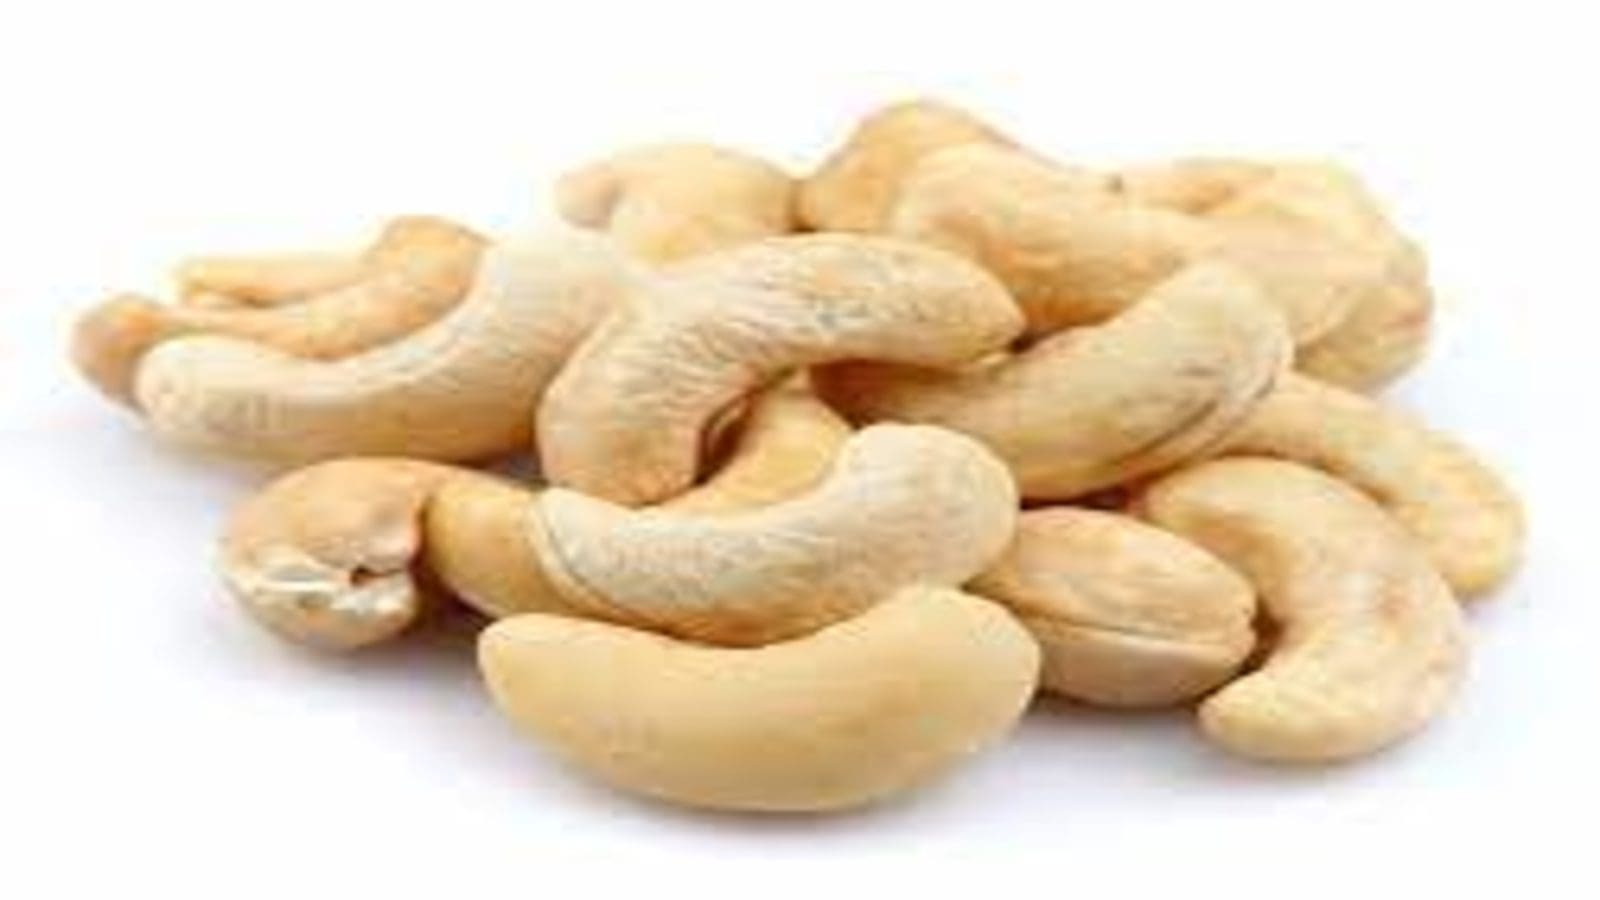 Nigeria could fetch US$2.7 billion by increasing cashew nut production to 1MMT